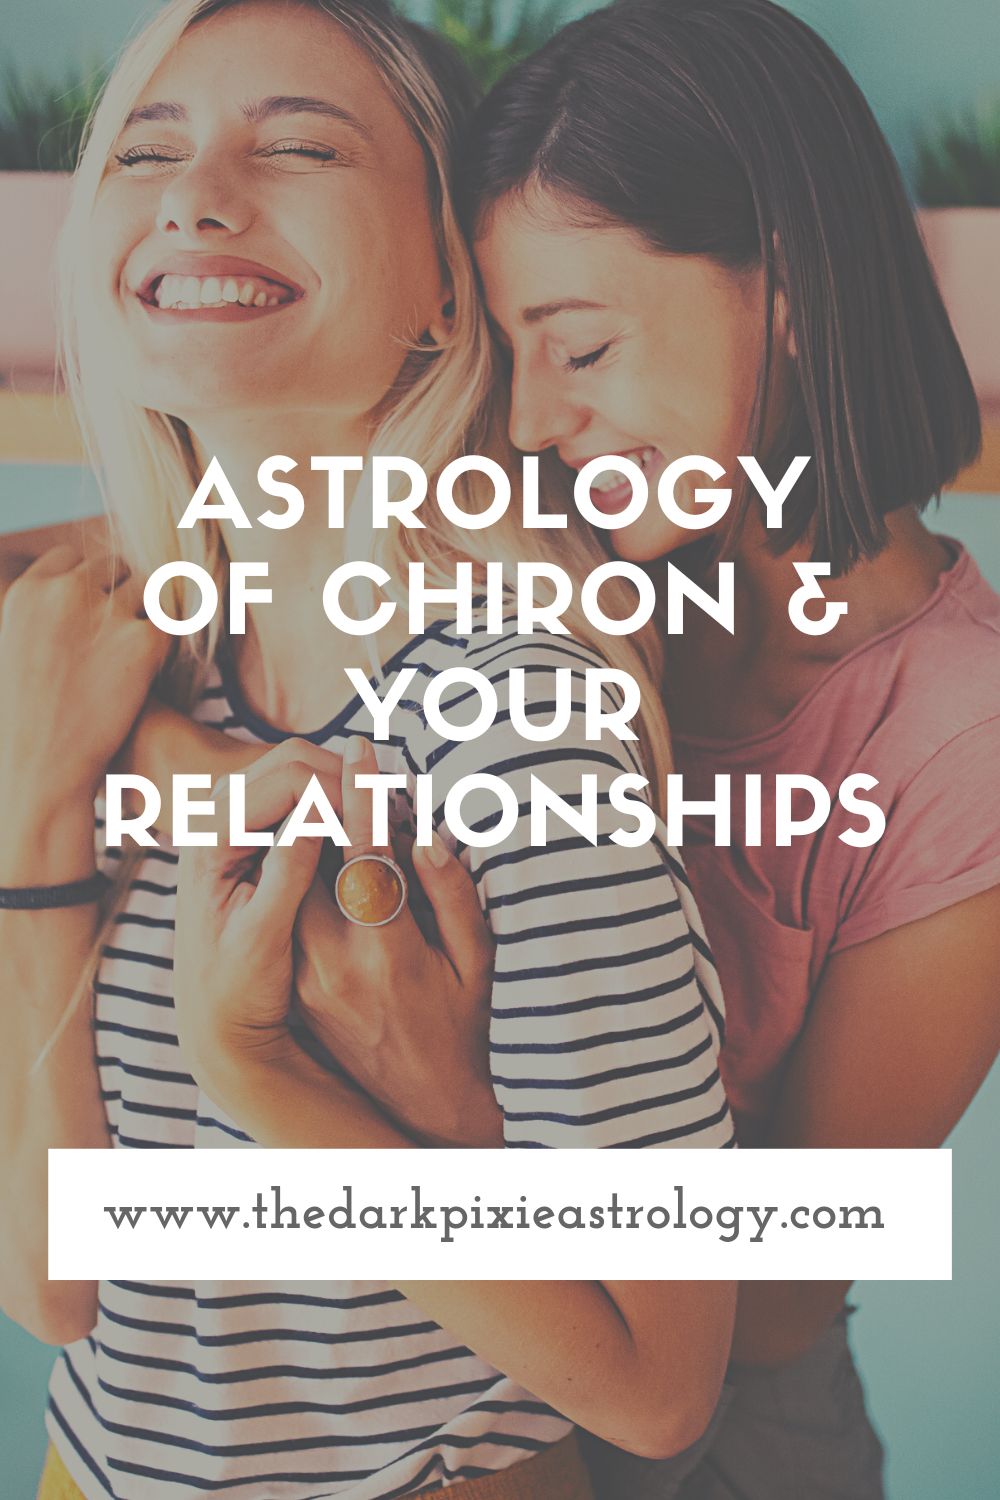 Astrology of Chiron & Your Relationships - The Dark Pixie Astrology